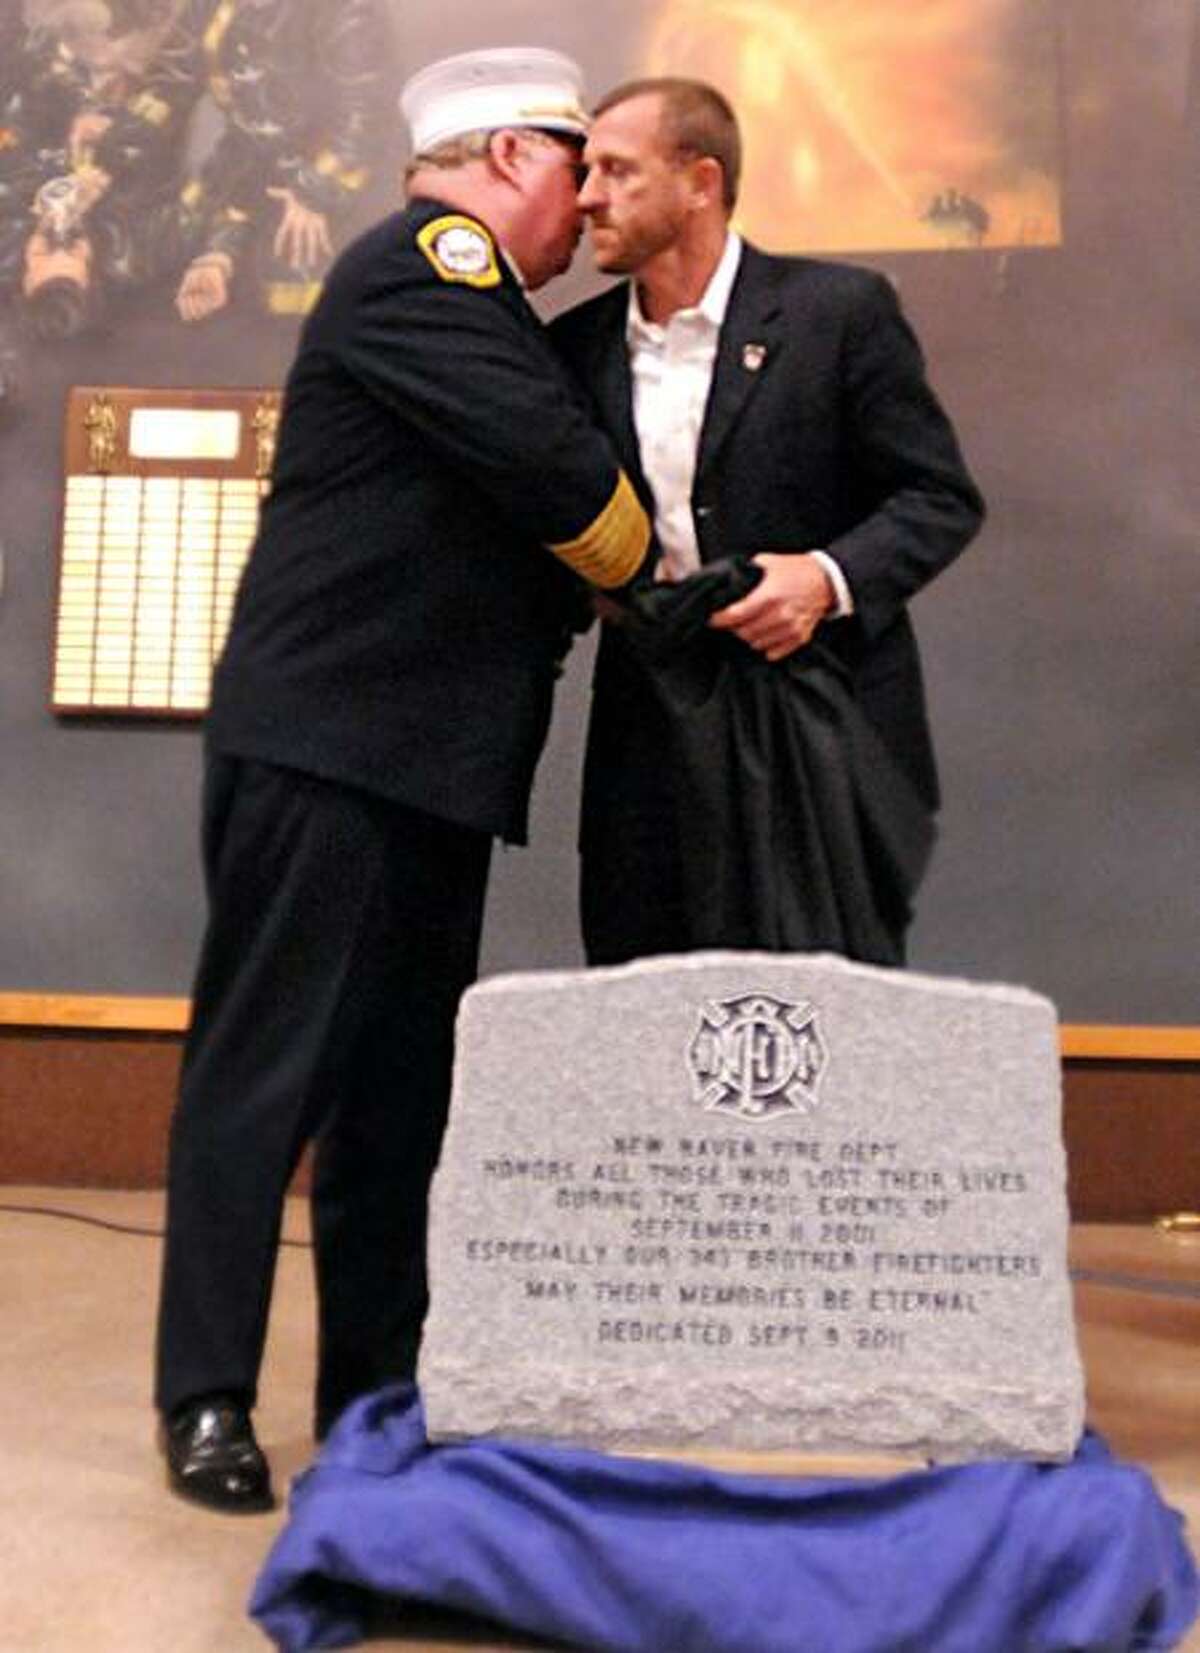 New Haven Fire Chief Michael E. Grant, left, hugs his friend, retired New York City Firefighter Tim Brown of Rescue Co. 3, after the unveiling Friday of a Memorial Stone honoring all the people who died in the World Trade Center attacks, including the firefighters who lost their lives. A memorial service was held Friday at the New Haven Regional Fire Training Academy to commemorate the 10th anniversary of the attacks. Brown was a first responder to the World Trade Center. Peter Hvizdak/Register September 9, 2011 ph2360 Connecticut